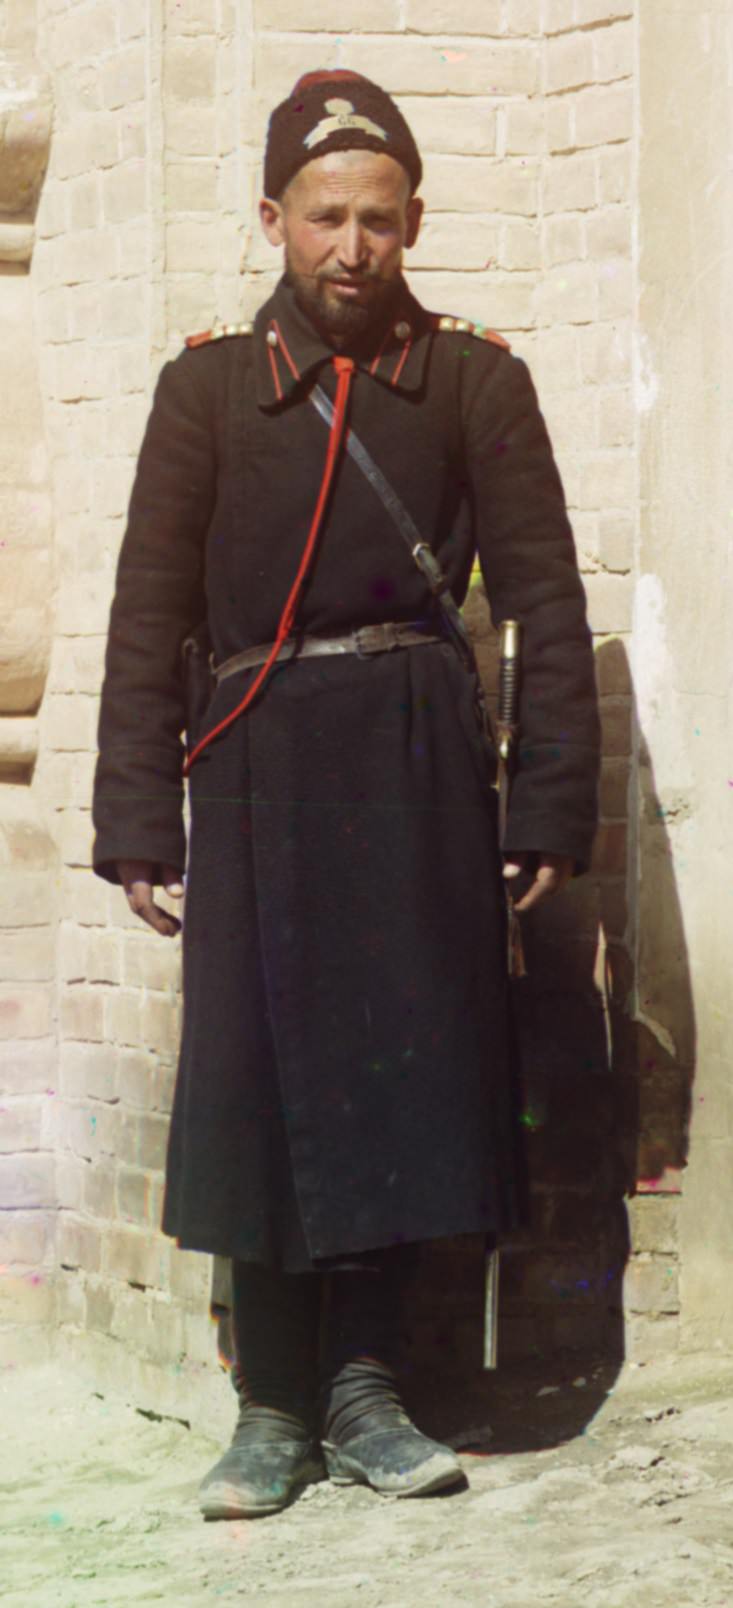 A man from the Uzbek region of Asia in 1912.